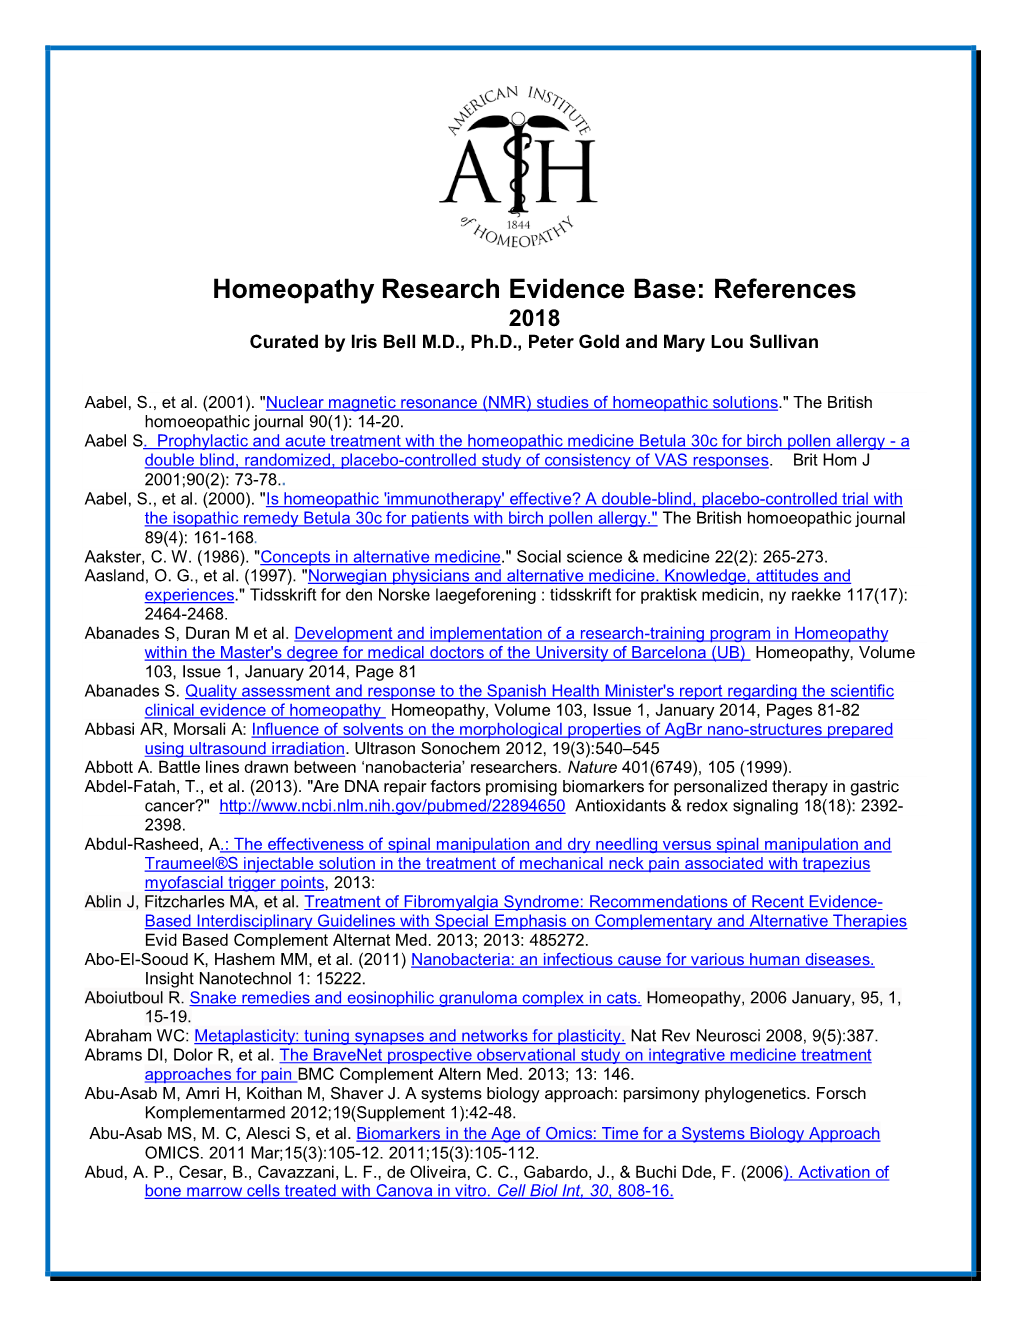 Homeopathy Research Listing